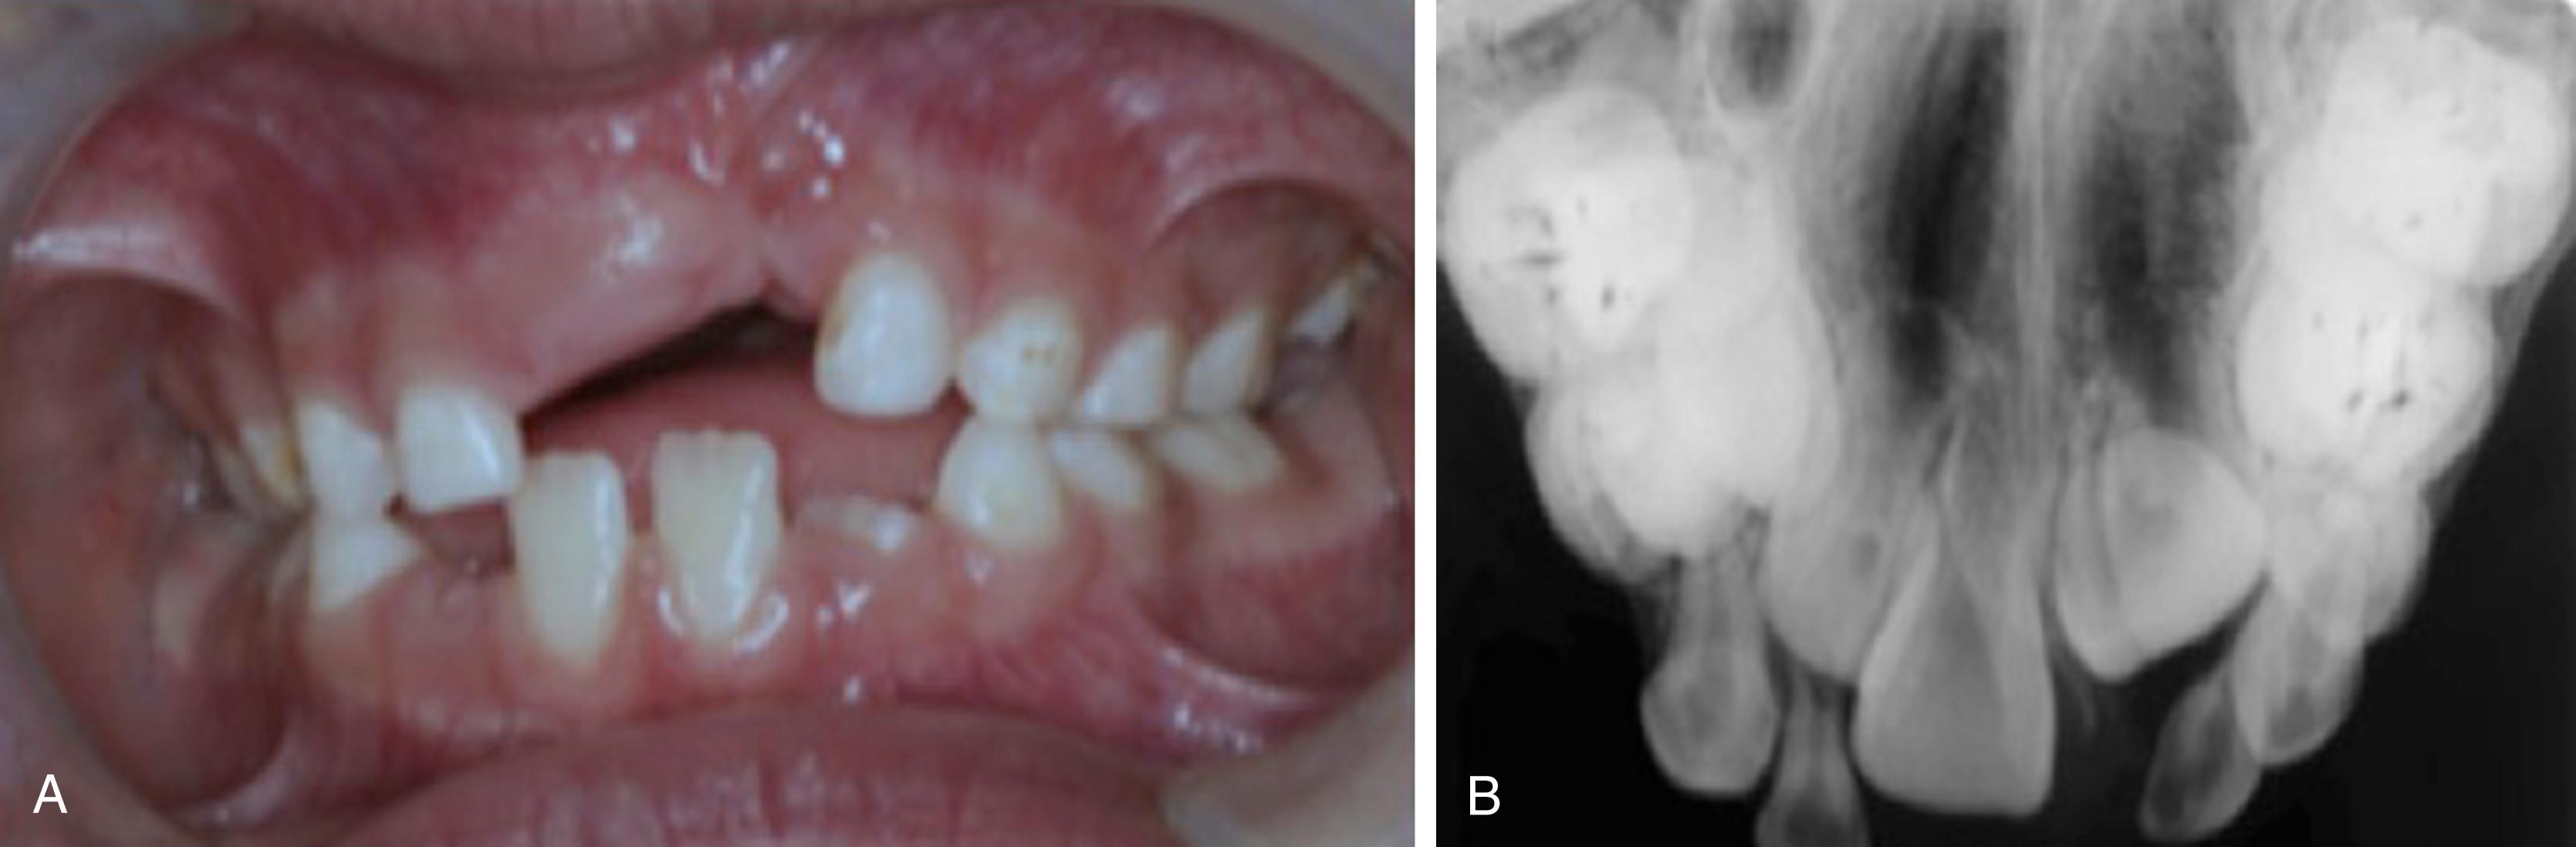 Fig. 28.5, Oral anomalies in a patient with en coup de sabre (ECDS), age 6 years 11 months. A, Patient has an asymmetrical malformation in the frontal maxillary area affecting the attached gingivae in the region of two teeth (11 and 21). B, Dental X-rays show ectopic eruption of tooth 21, which has a short malformed root development, and ectopic location of left maxillary central incisors. (From Hørberg M, Lauesen S, Daugaard-Jensen J, Kjaer I. Linear scleroderma en coup de sabre including abnormal dental development. Eur Arch Paediatr Dent 2015;16:227-31 with permission.)